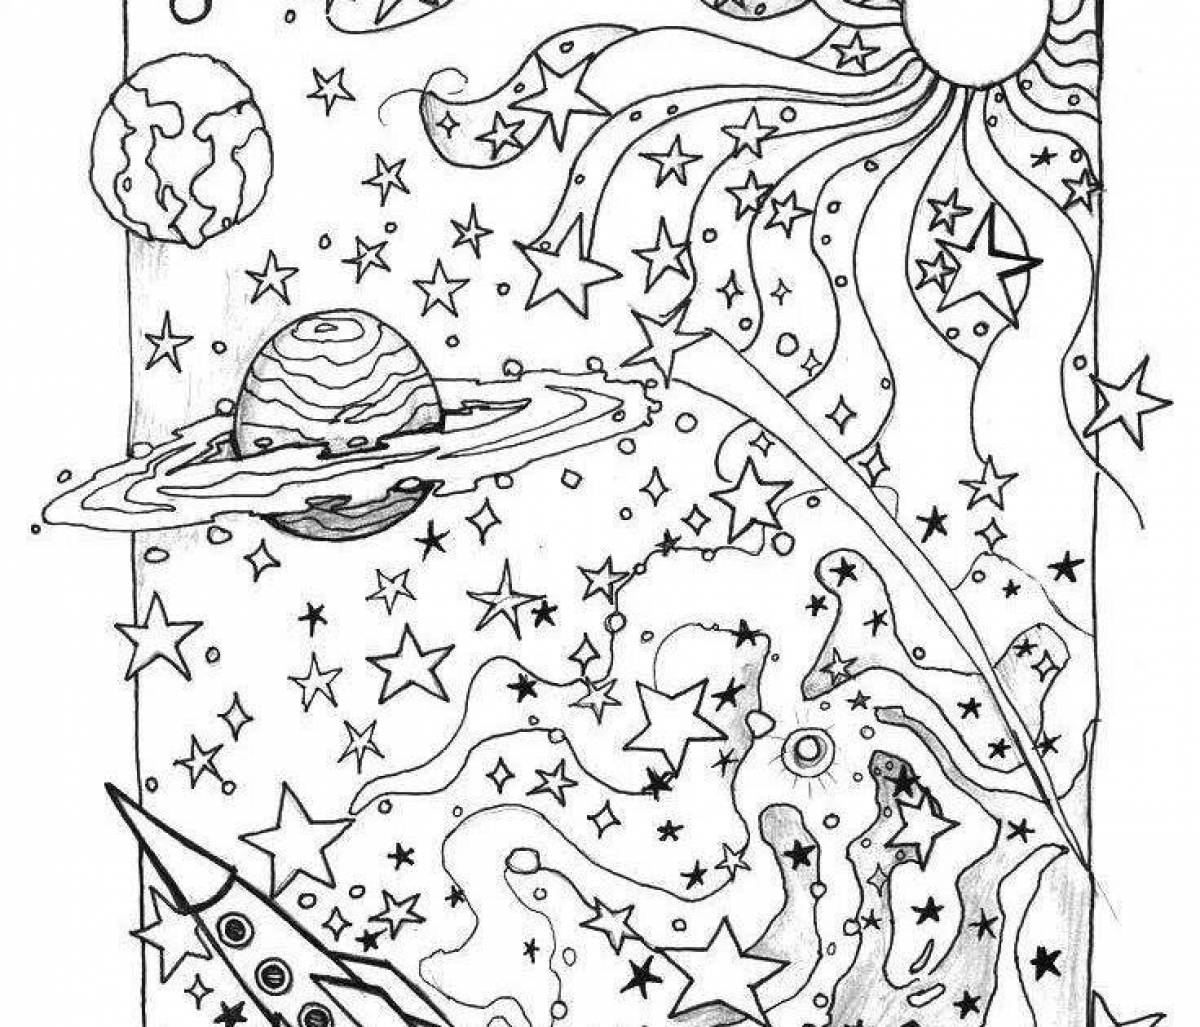 Inspirational space antistress coloring book